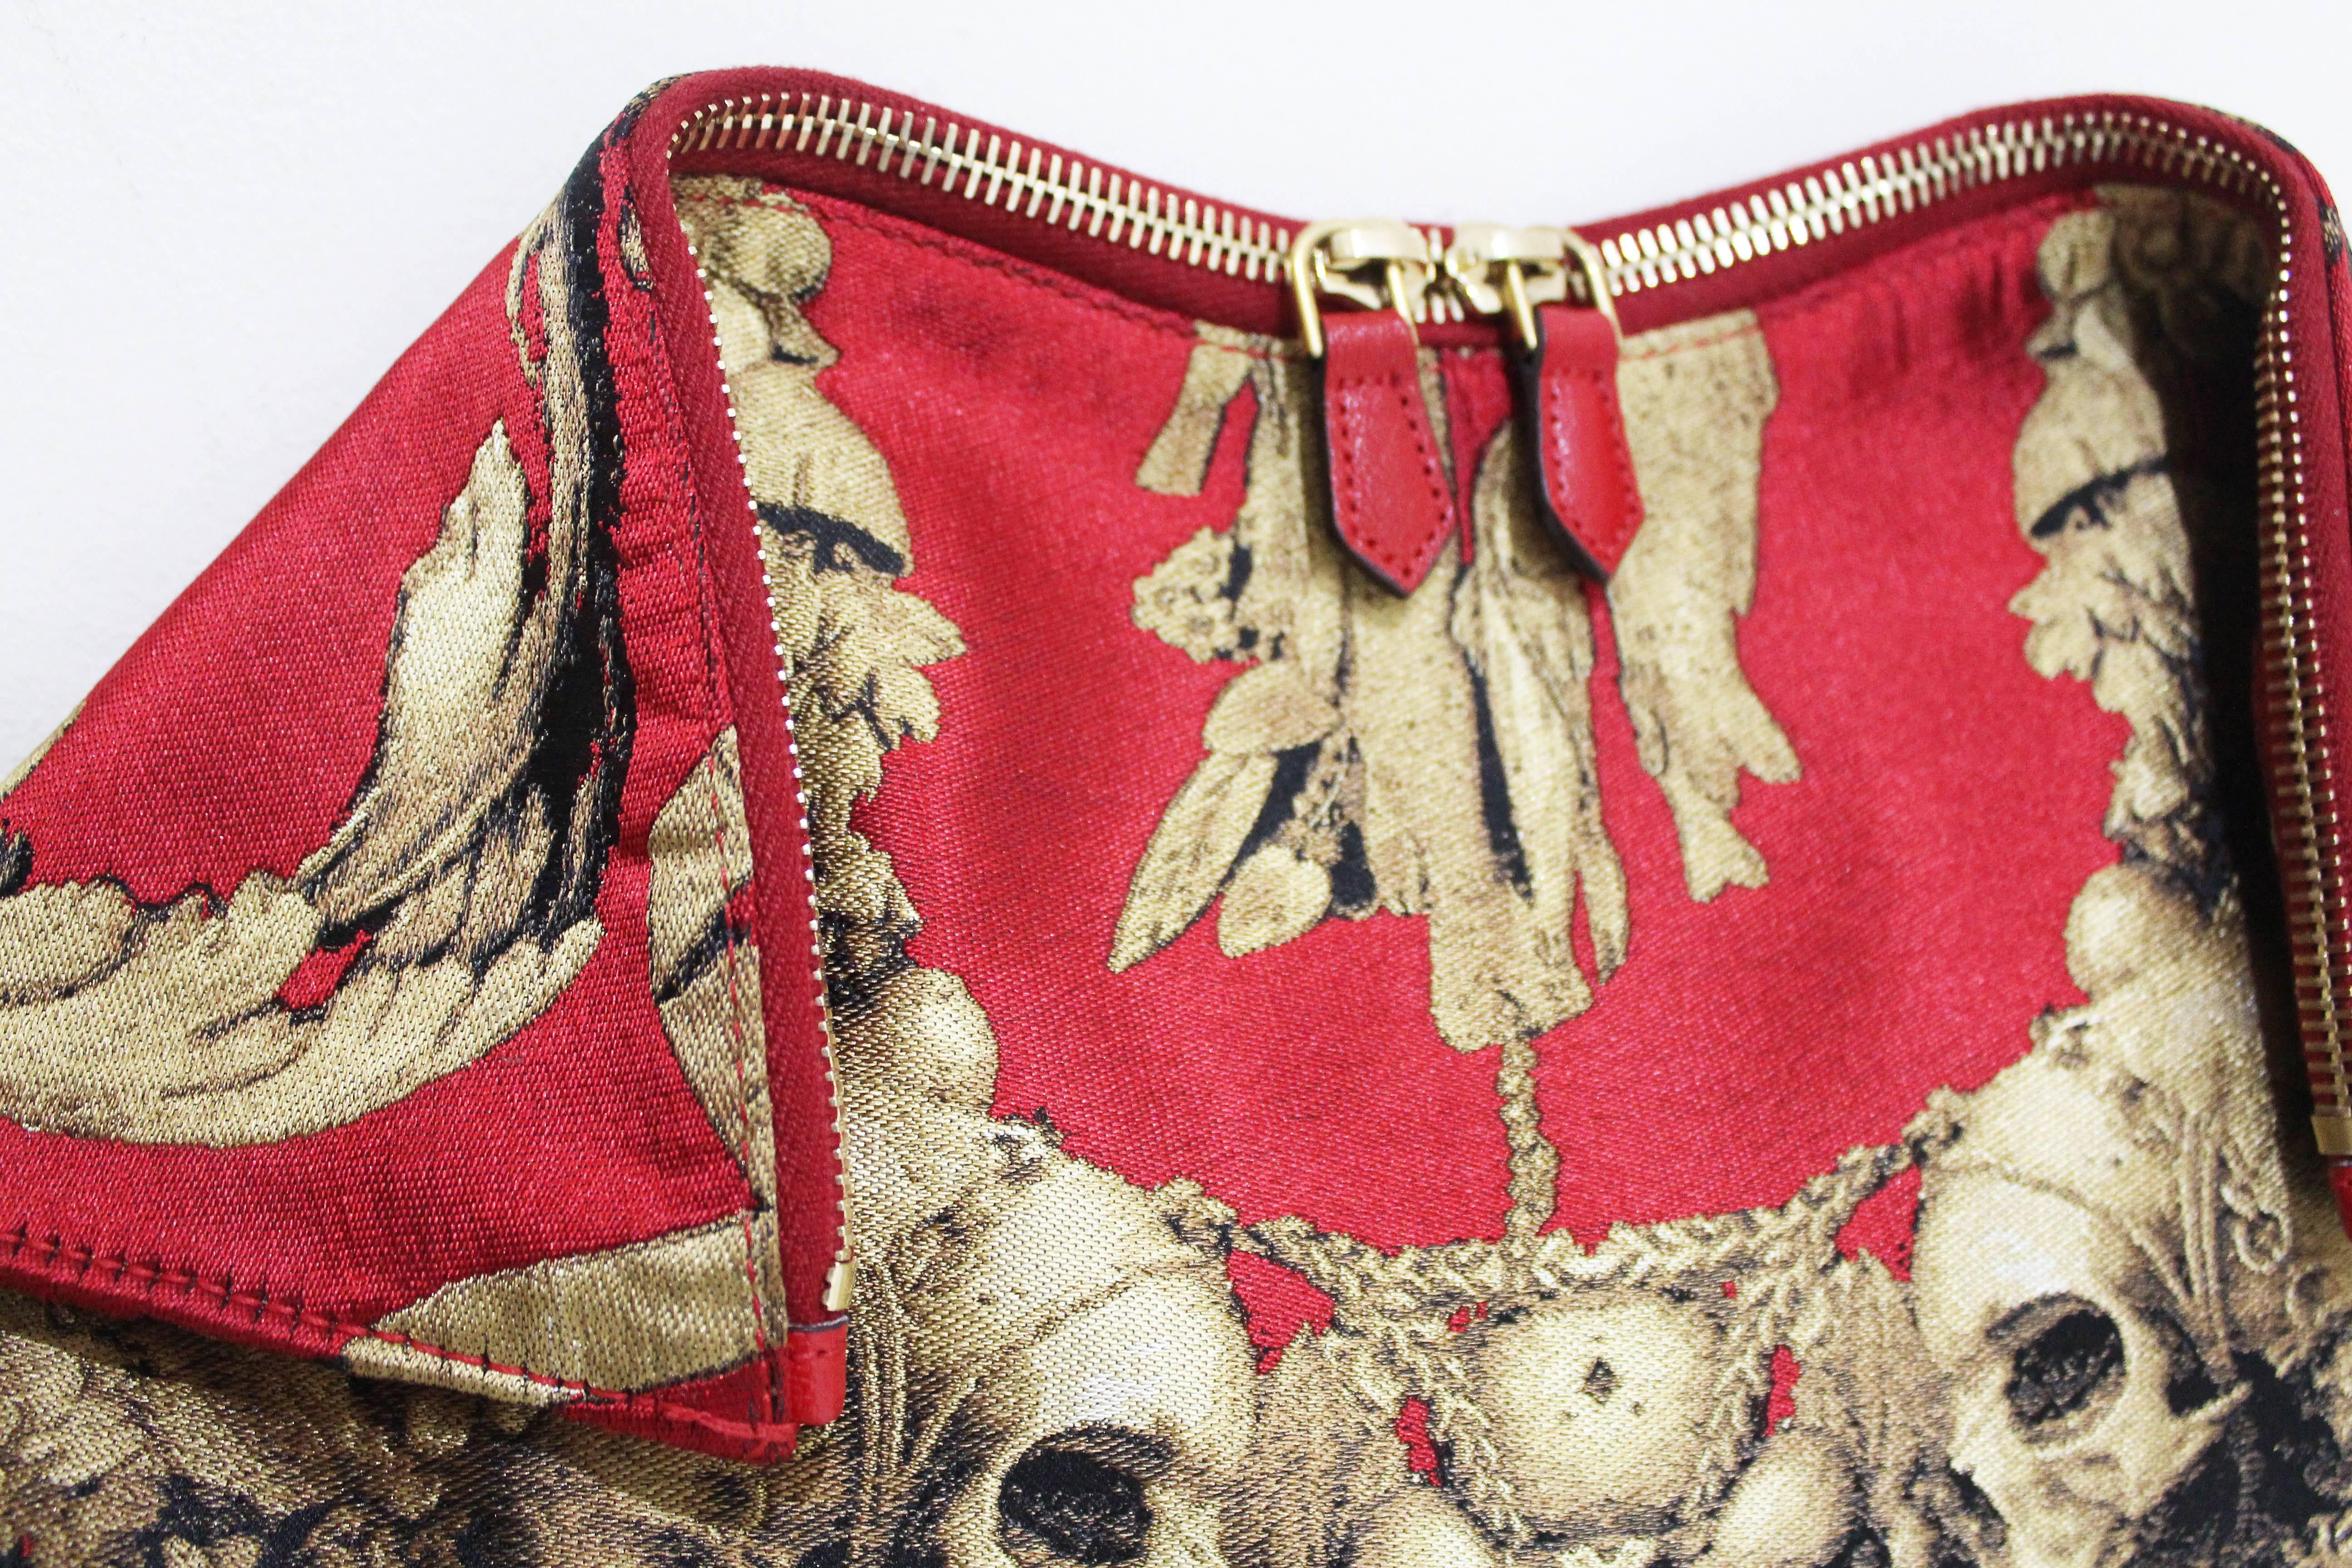 Autumn/Winter 2010 (Alexander McQueens last collection released after his death)

Red and gold Gibbons print clutch with quilted corners, gold double zipper top closure with magnetic fold over edges and inside zippered pocket.